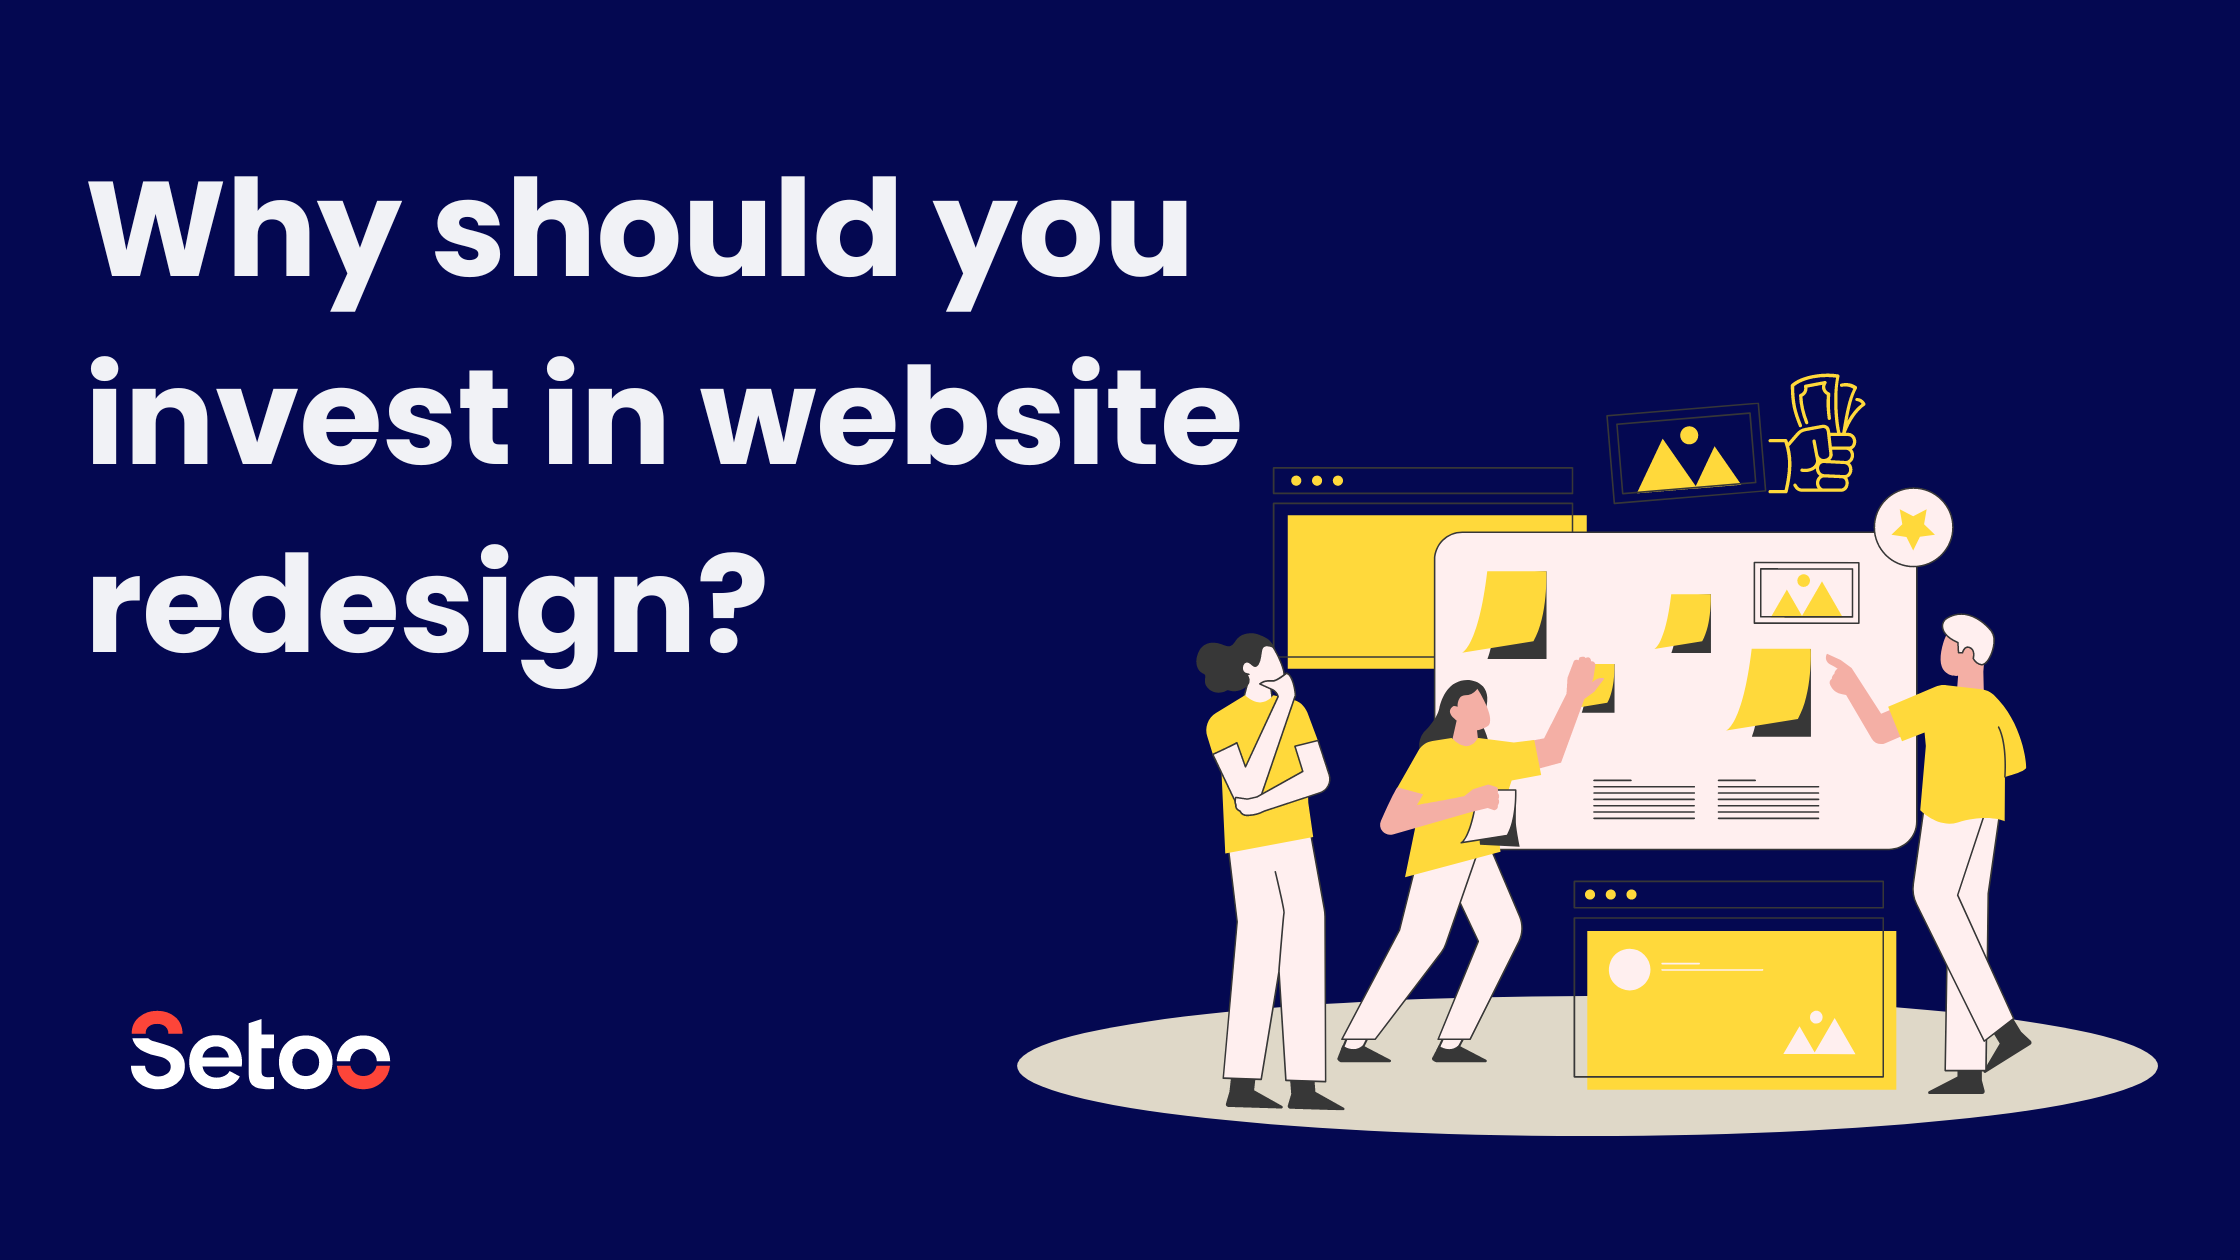 why should you invest in website redesign